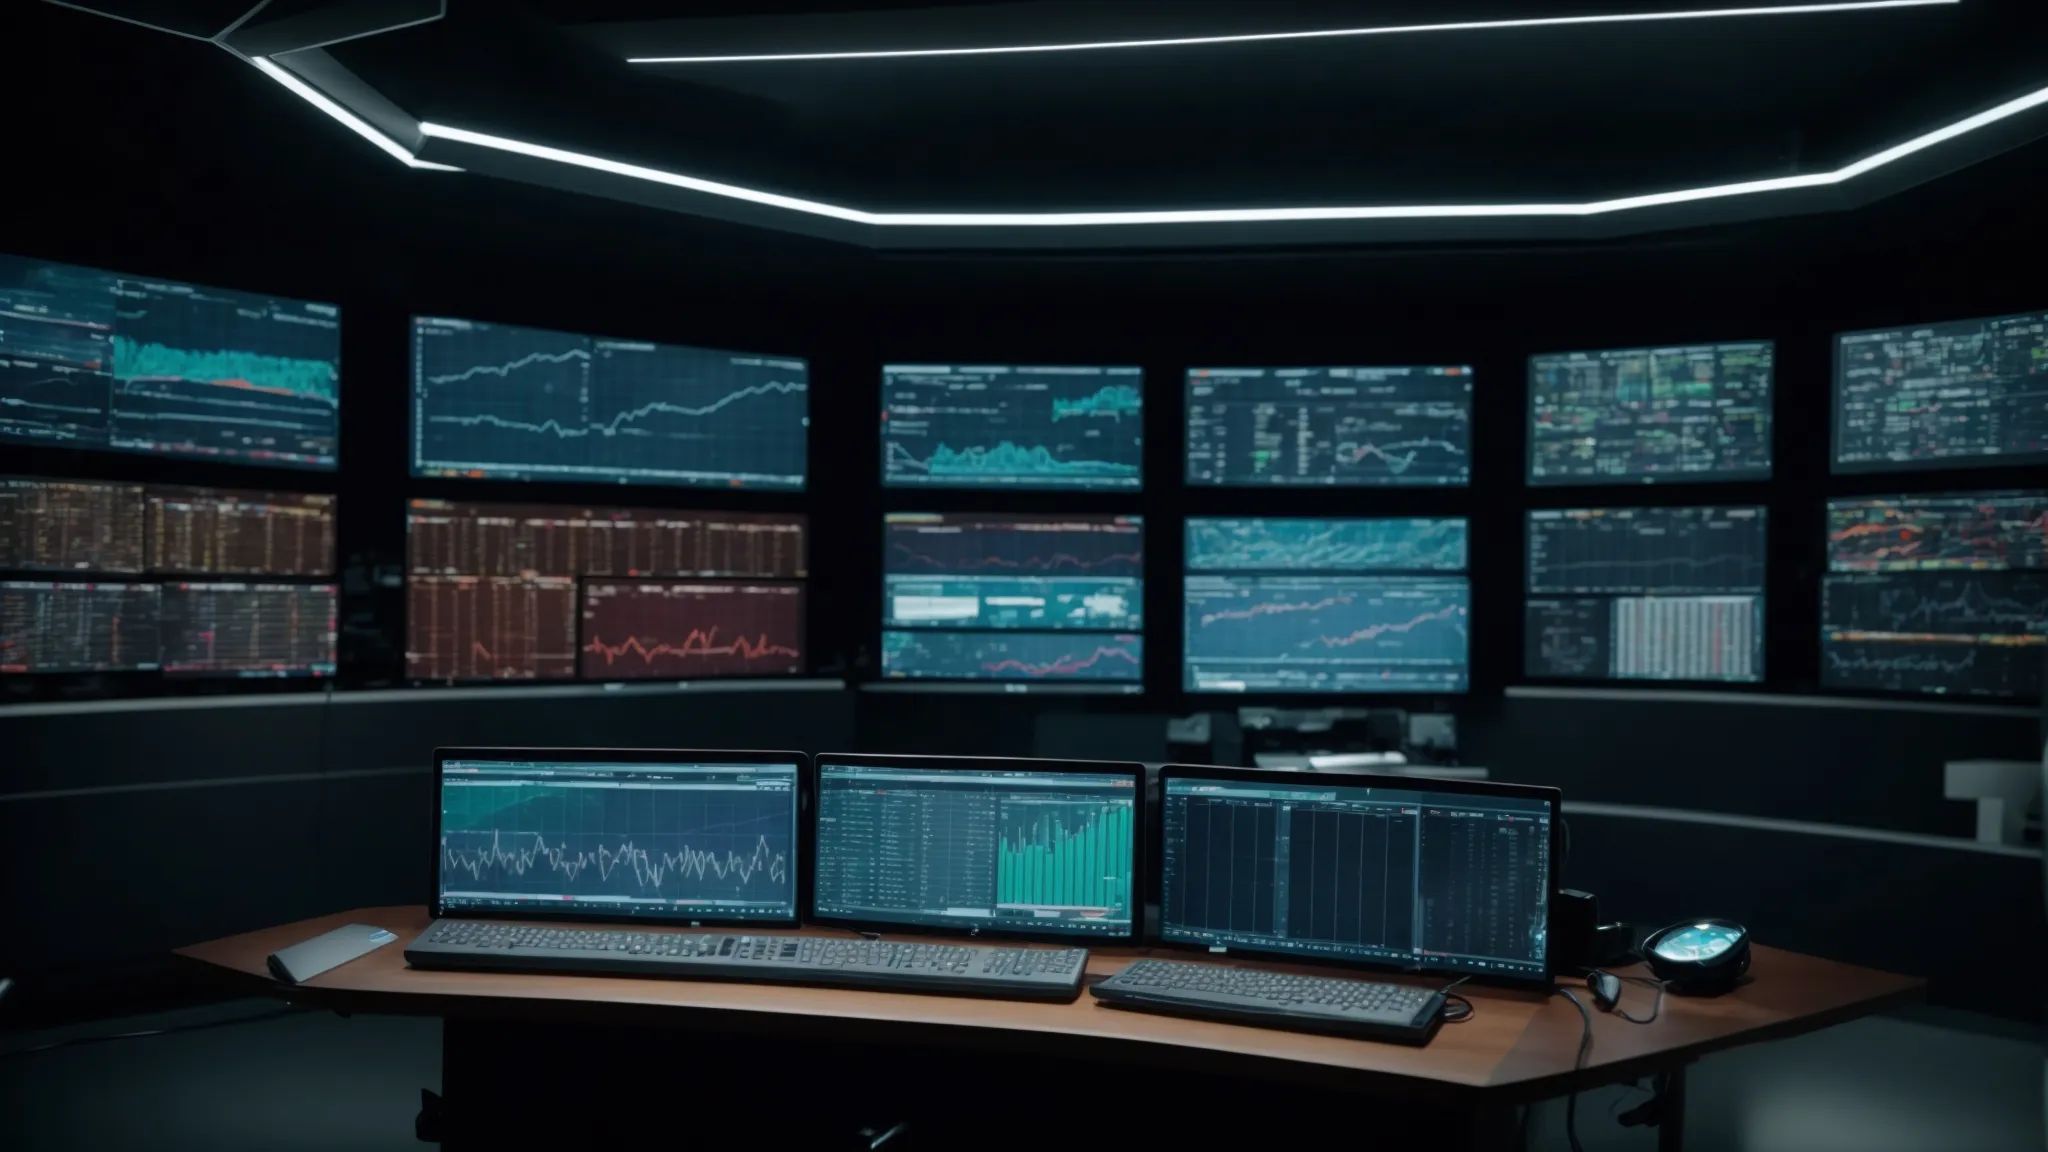 a high-tech control room with multiple screens displaying various analytics and data visualizations.